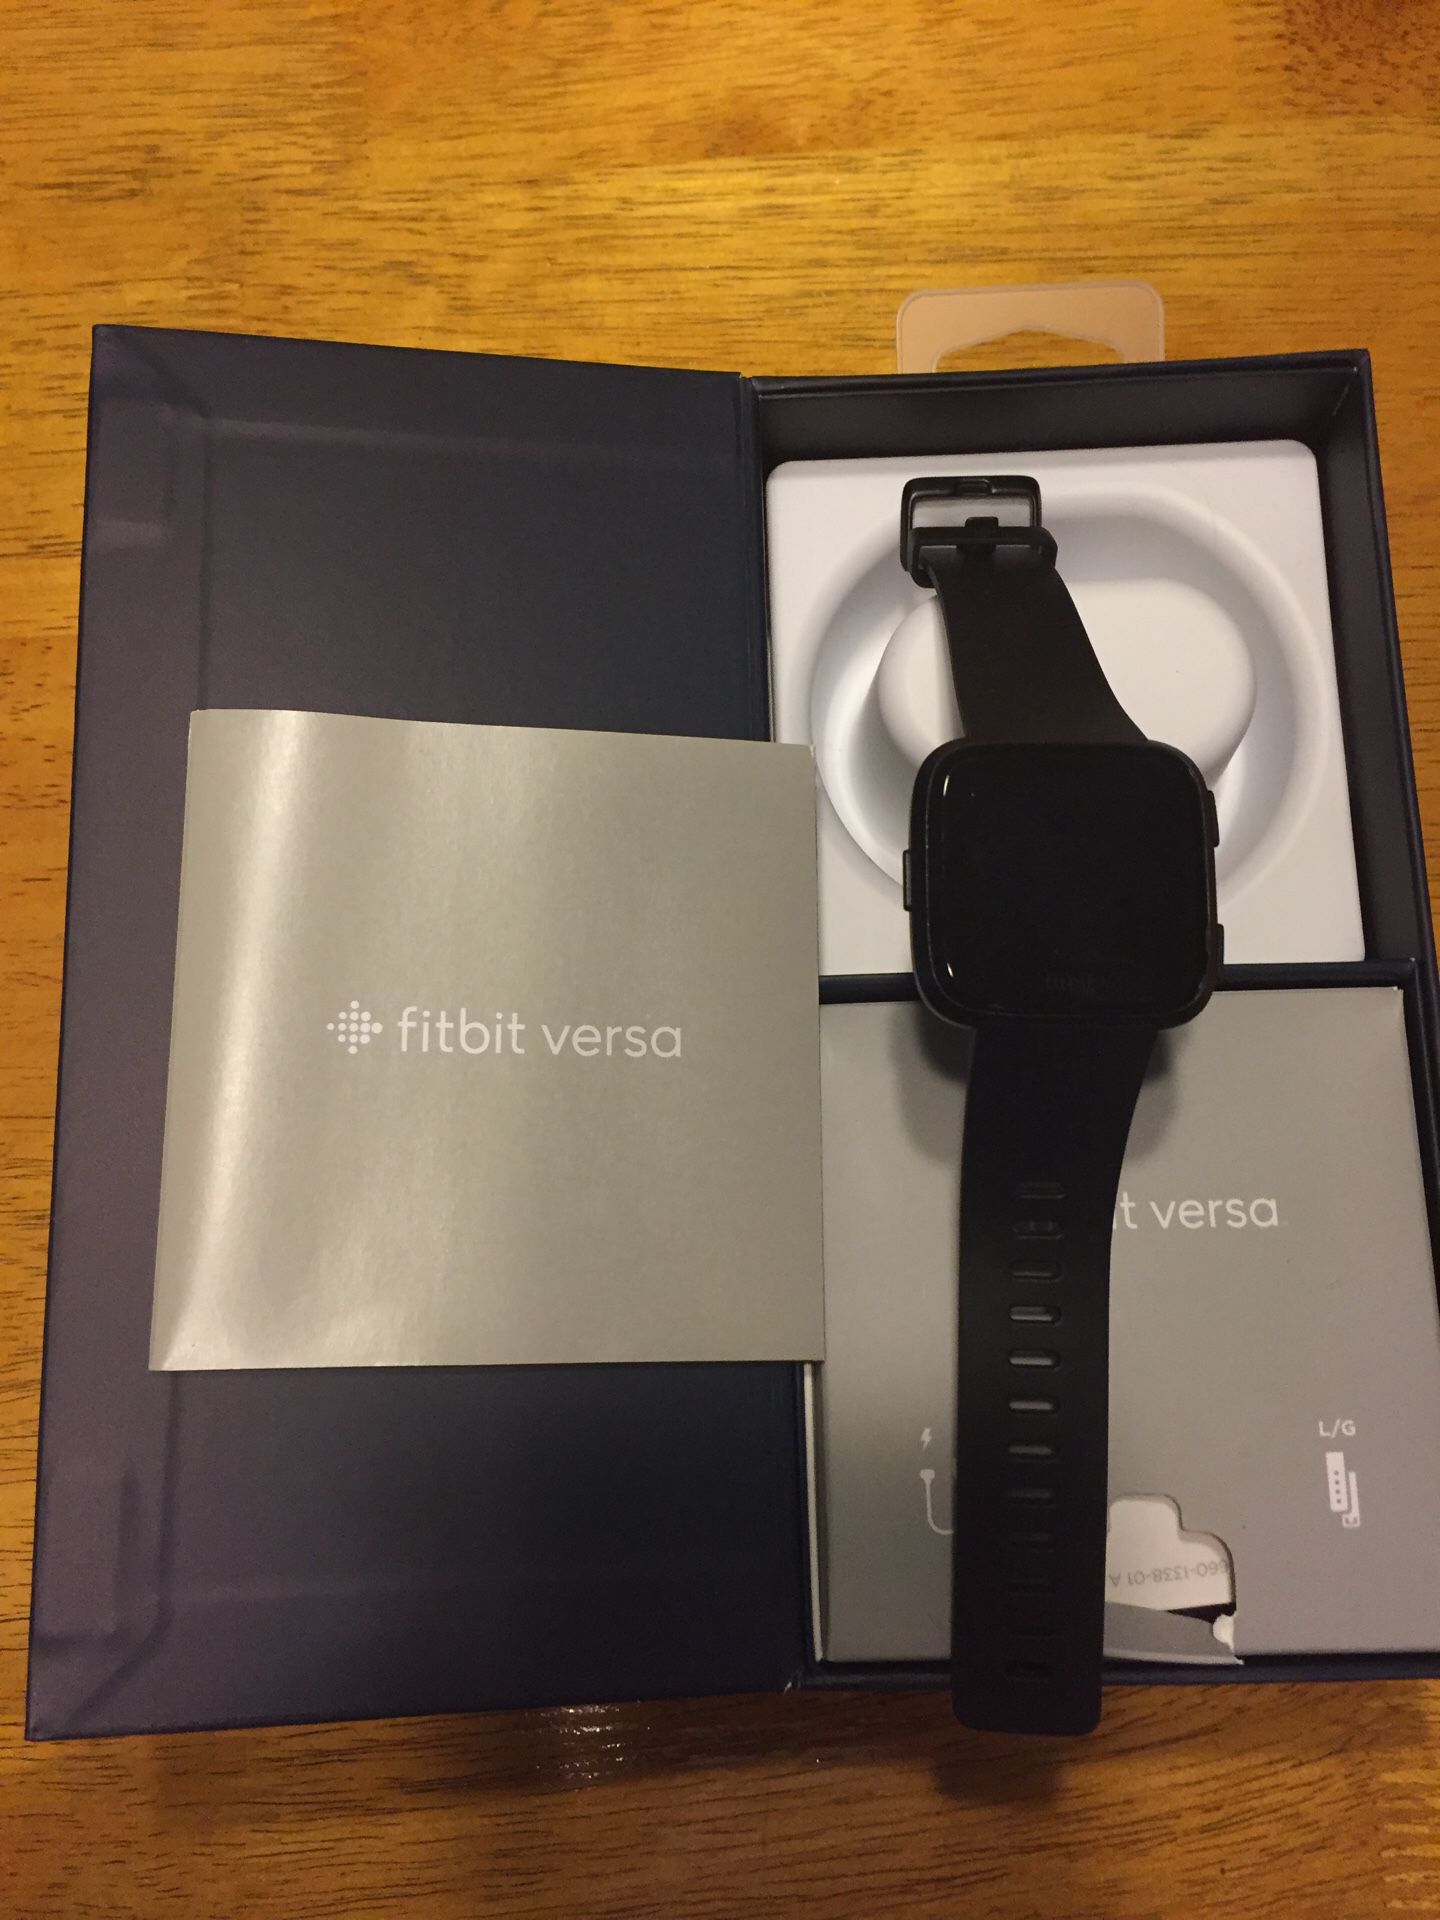 Fitbit versa black two Bands large and small